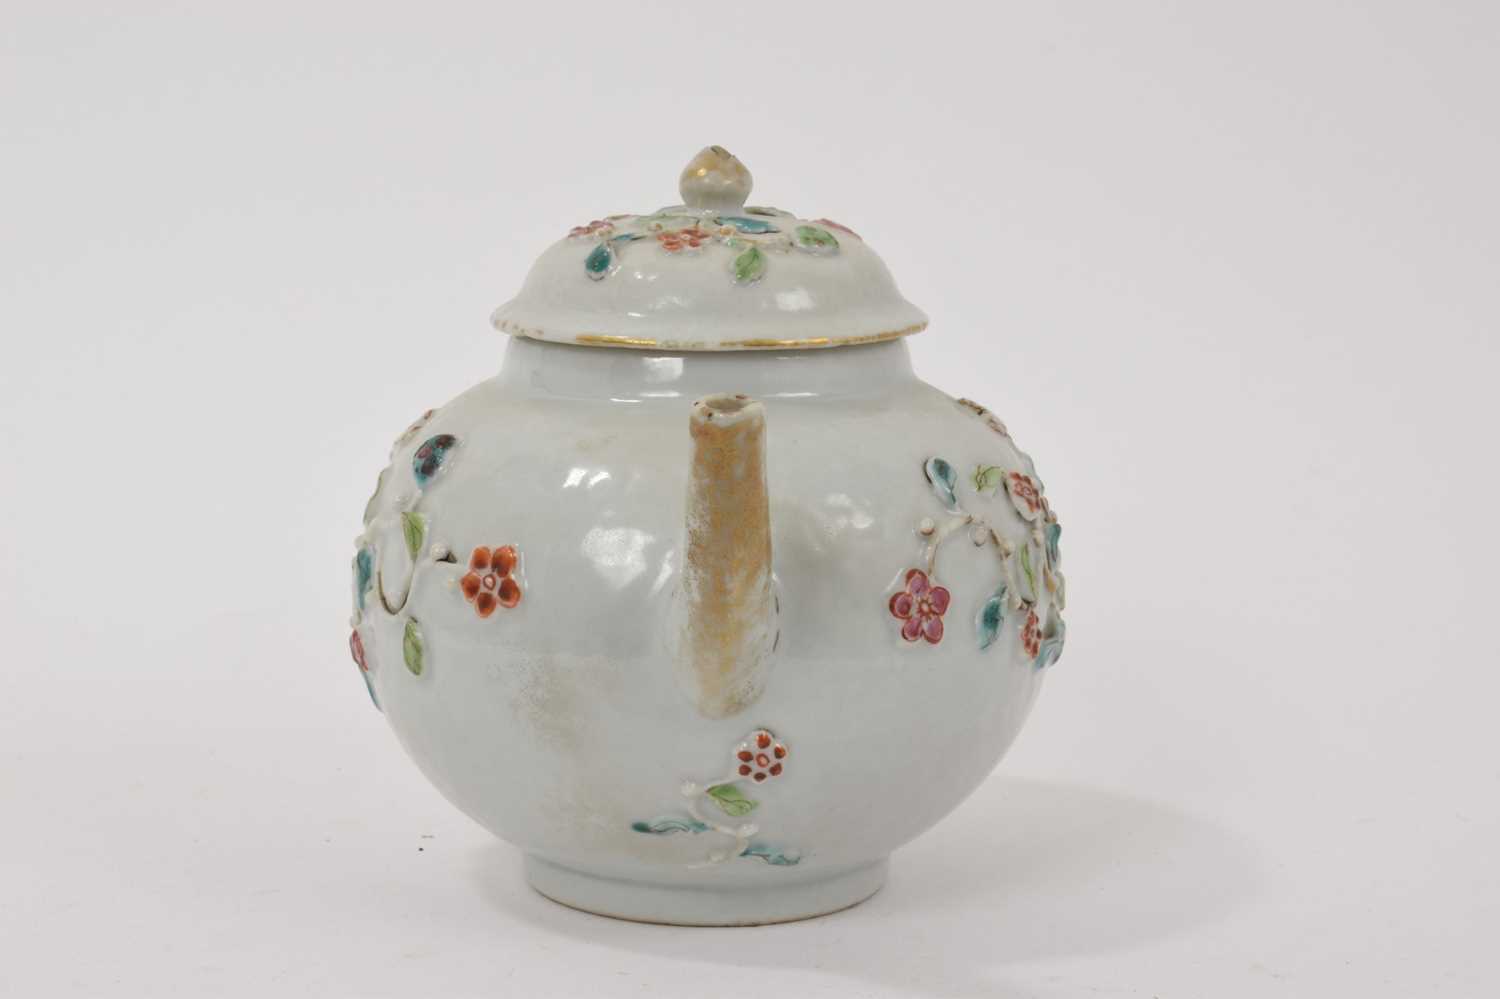 18th century Chinese export porcelain teapot and cover - Image 2 of 8